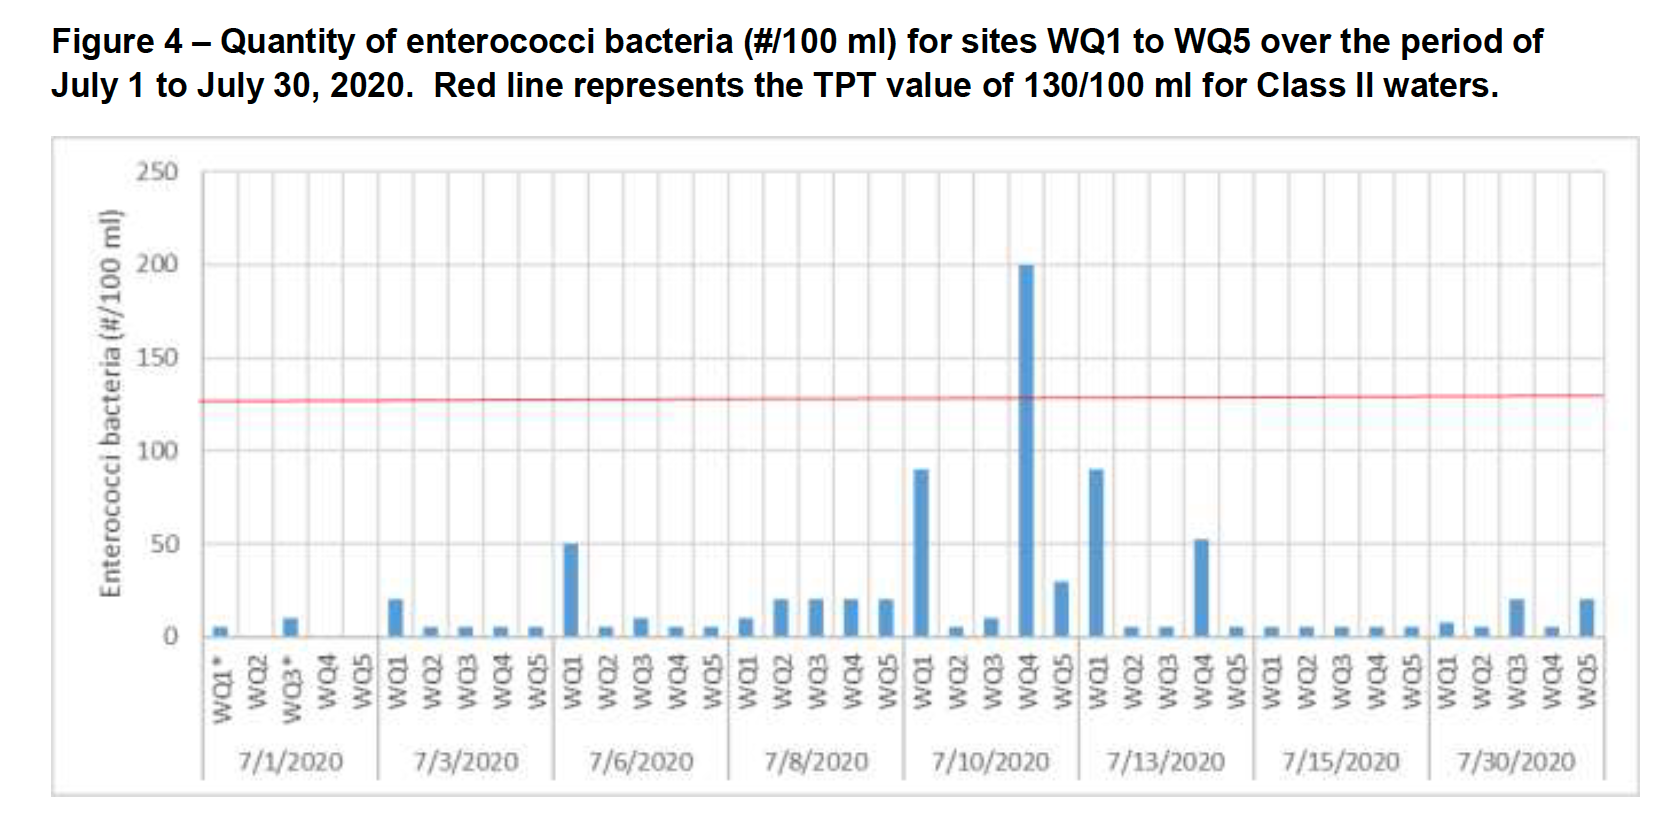 Quantity of enterococci bacteria (#/100 mL) for sites WQ1 to WQ5 over the period of July 1 to July 30. The red line represents the TPT value of 130/100 ml for Class II waters.